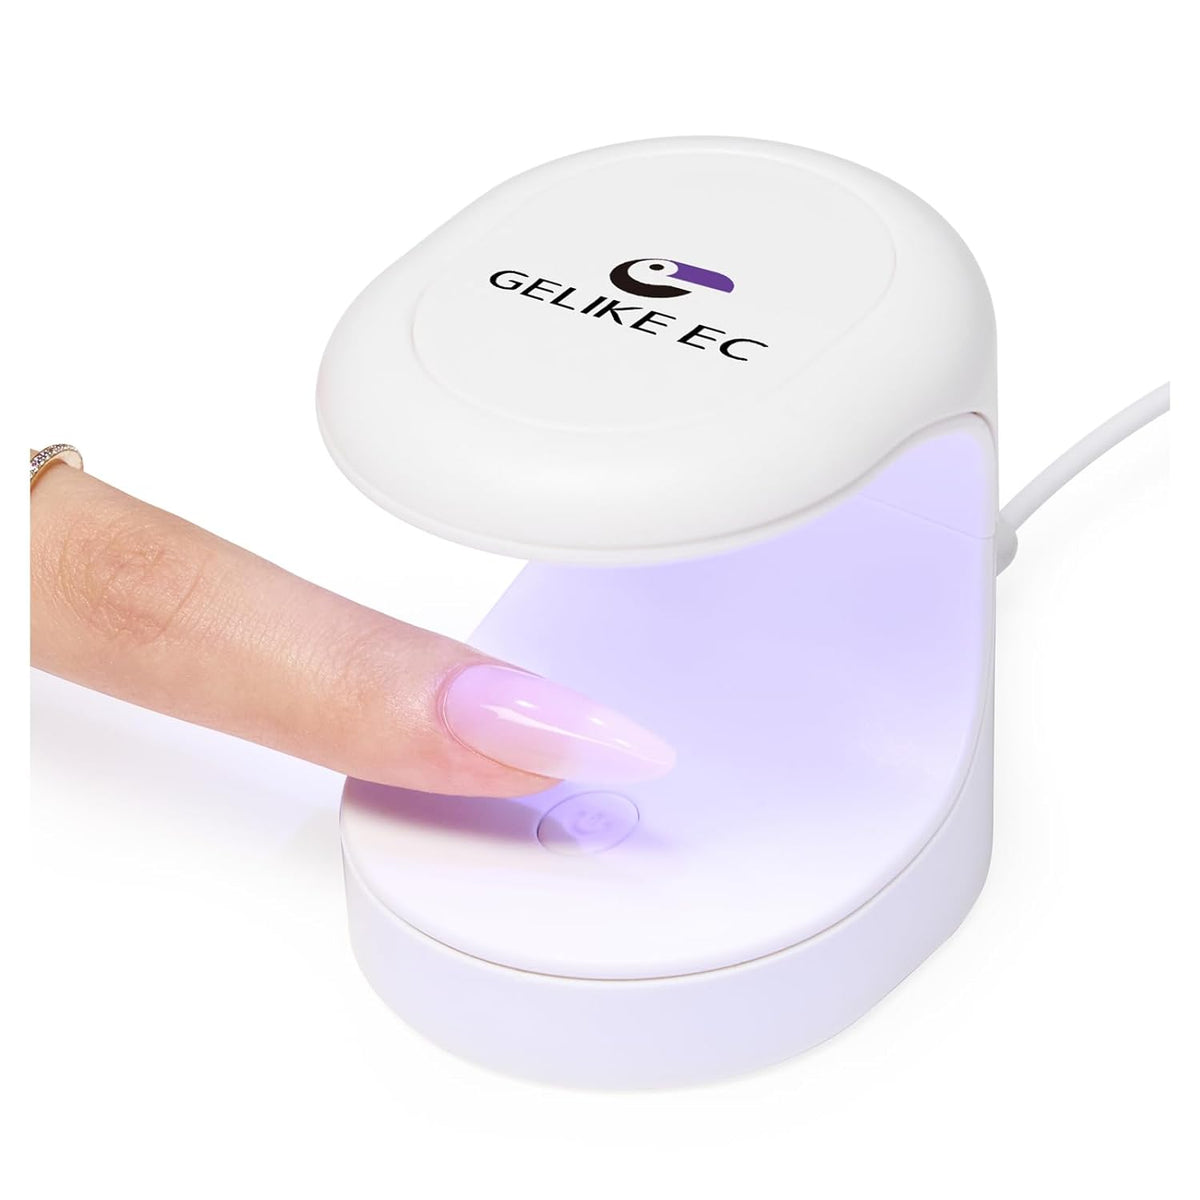 Best UV Light for Nails Easy and Flash Cure Light, Portable USB Nail Dryer for Travel Manicure UV LED Light for Gel Nail Art DIY Nail Art